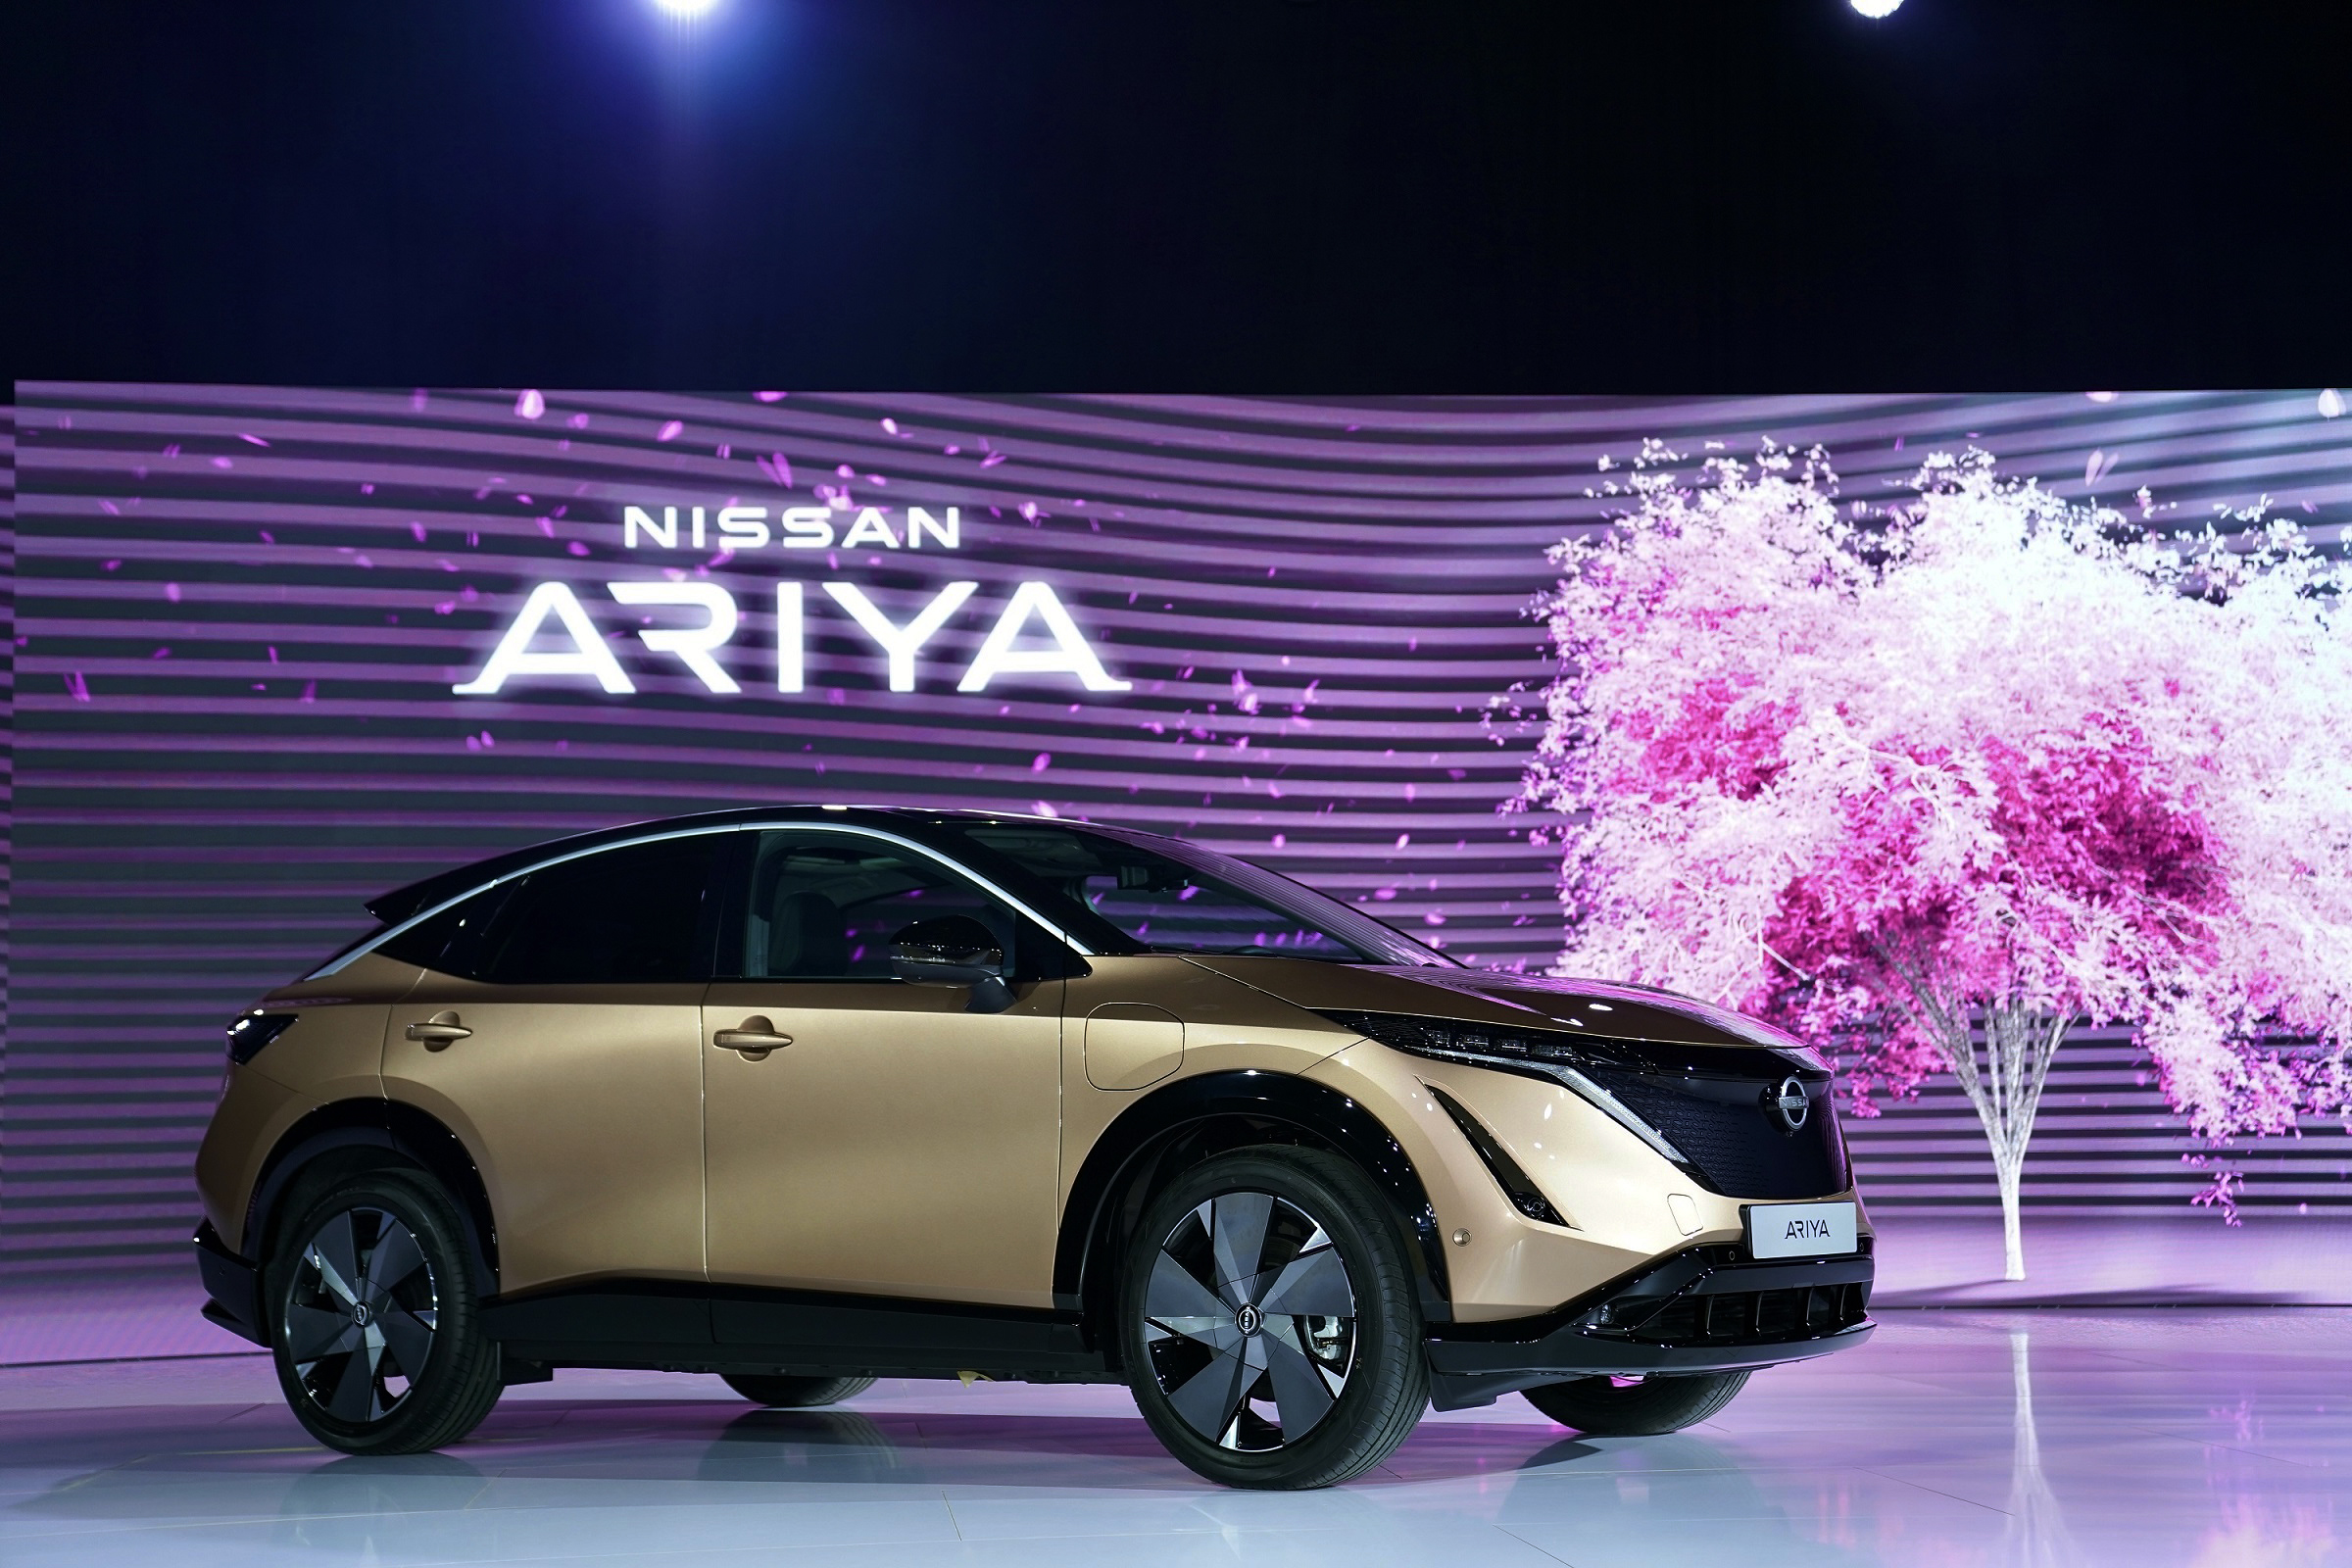 Nissan Ariya – First Regional Showcase during the “ Let’s Move Event “